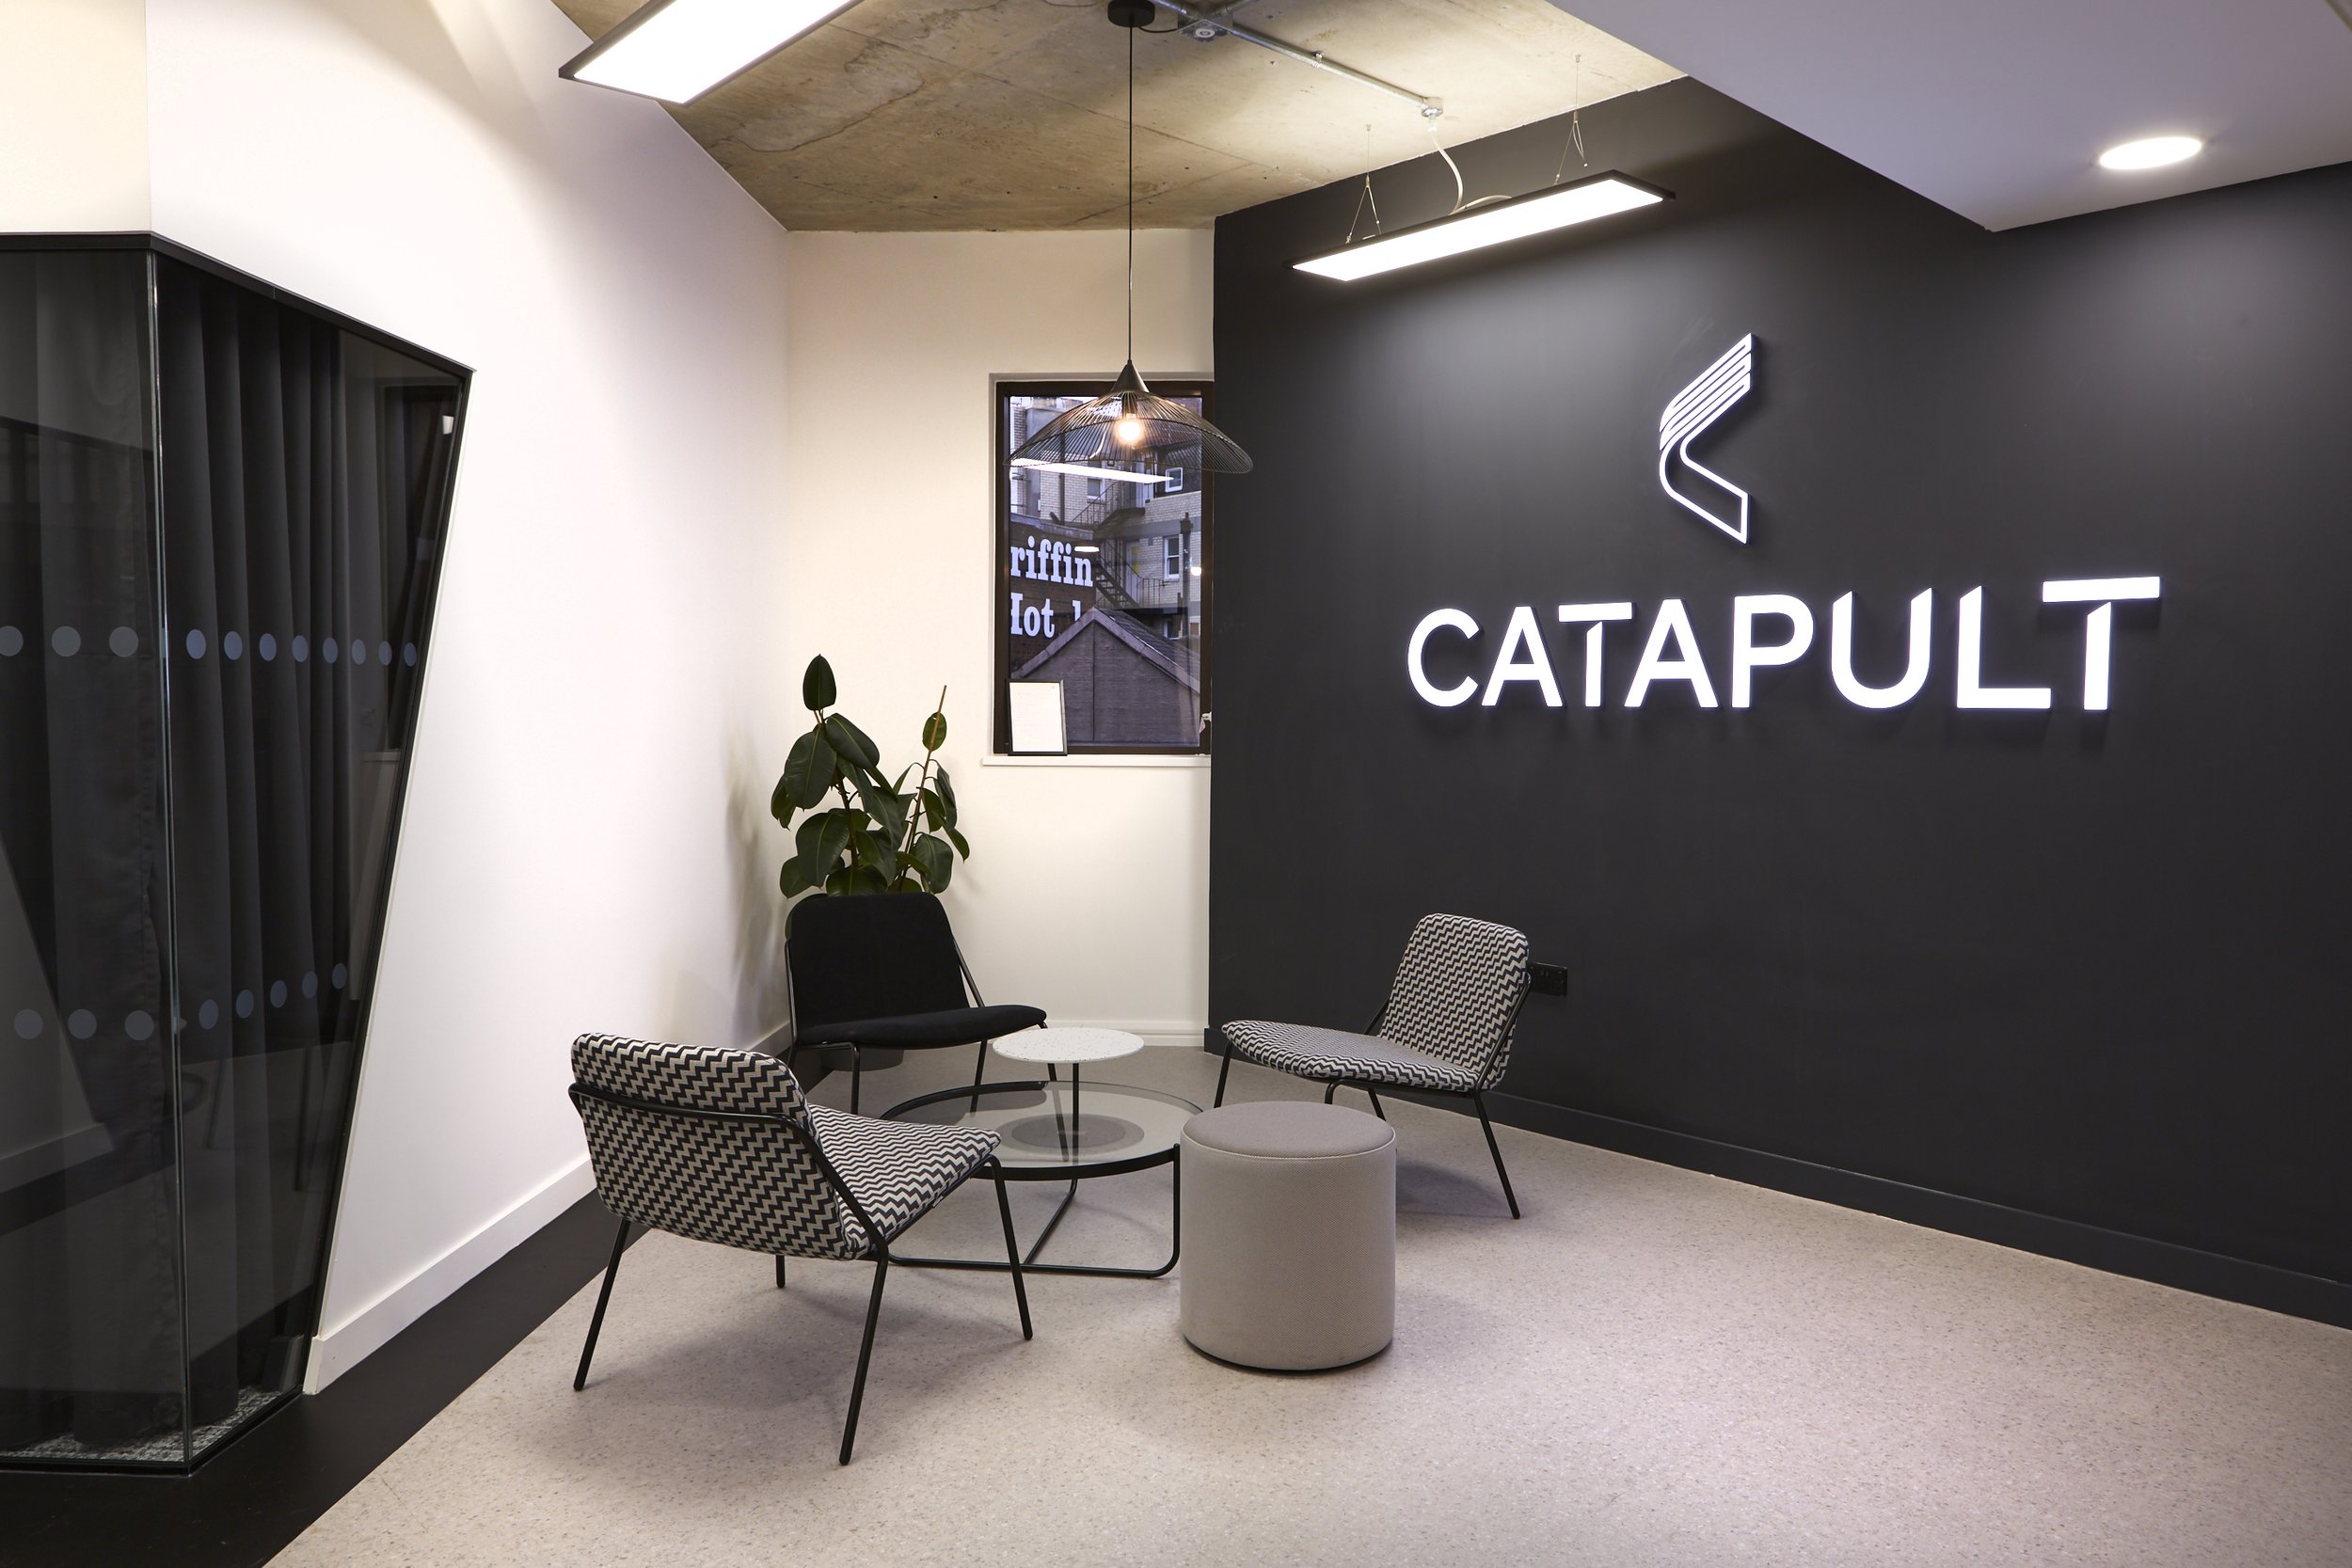 Catapult Sports  Absolute Commercial Interiors